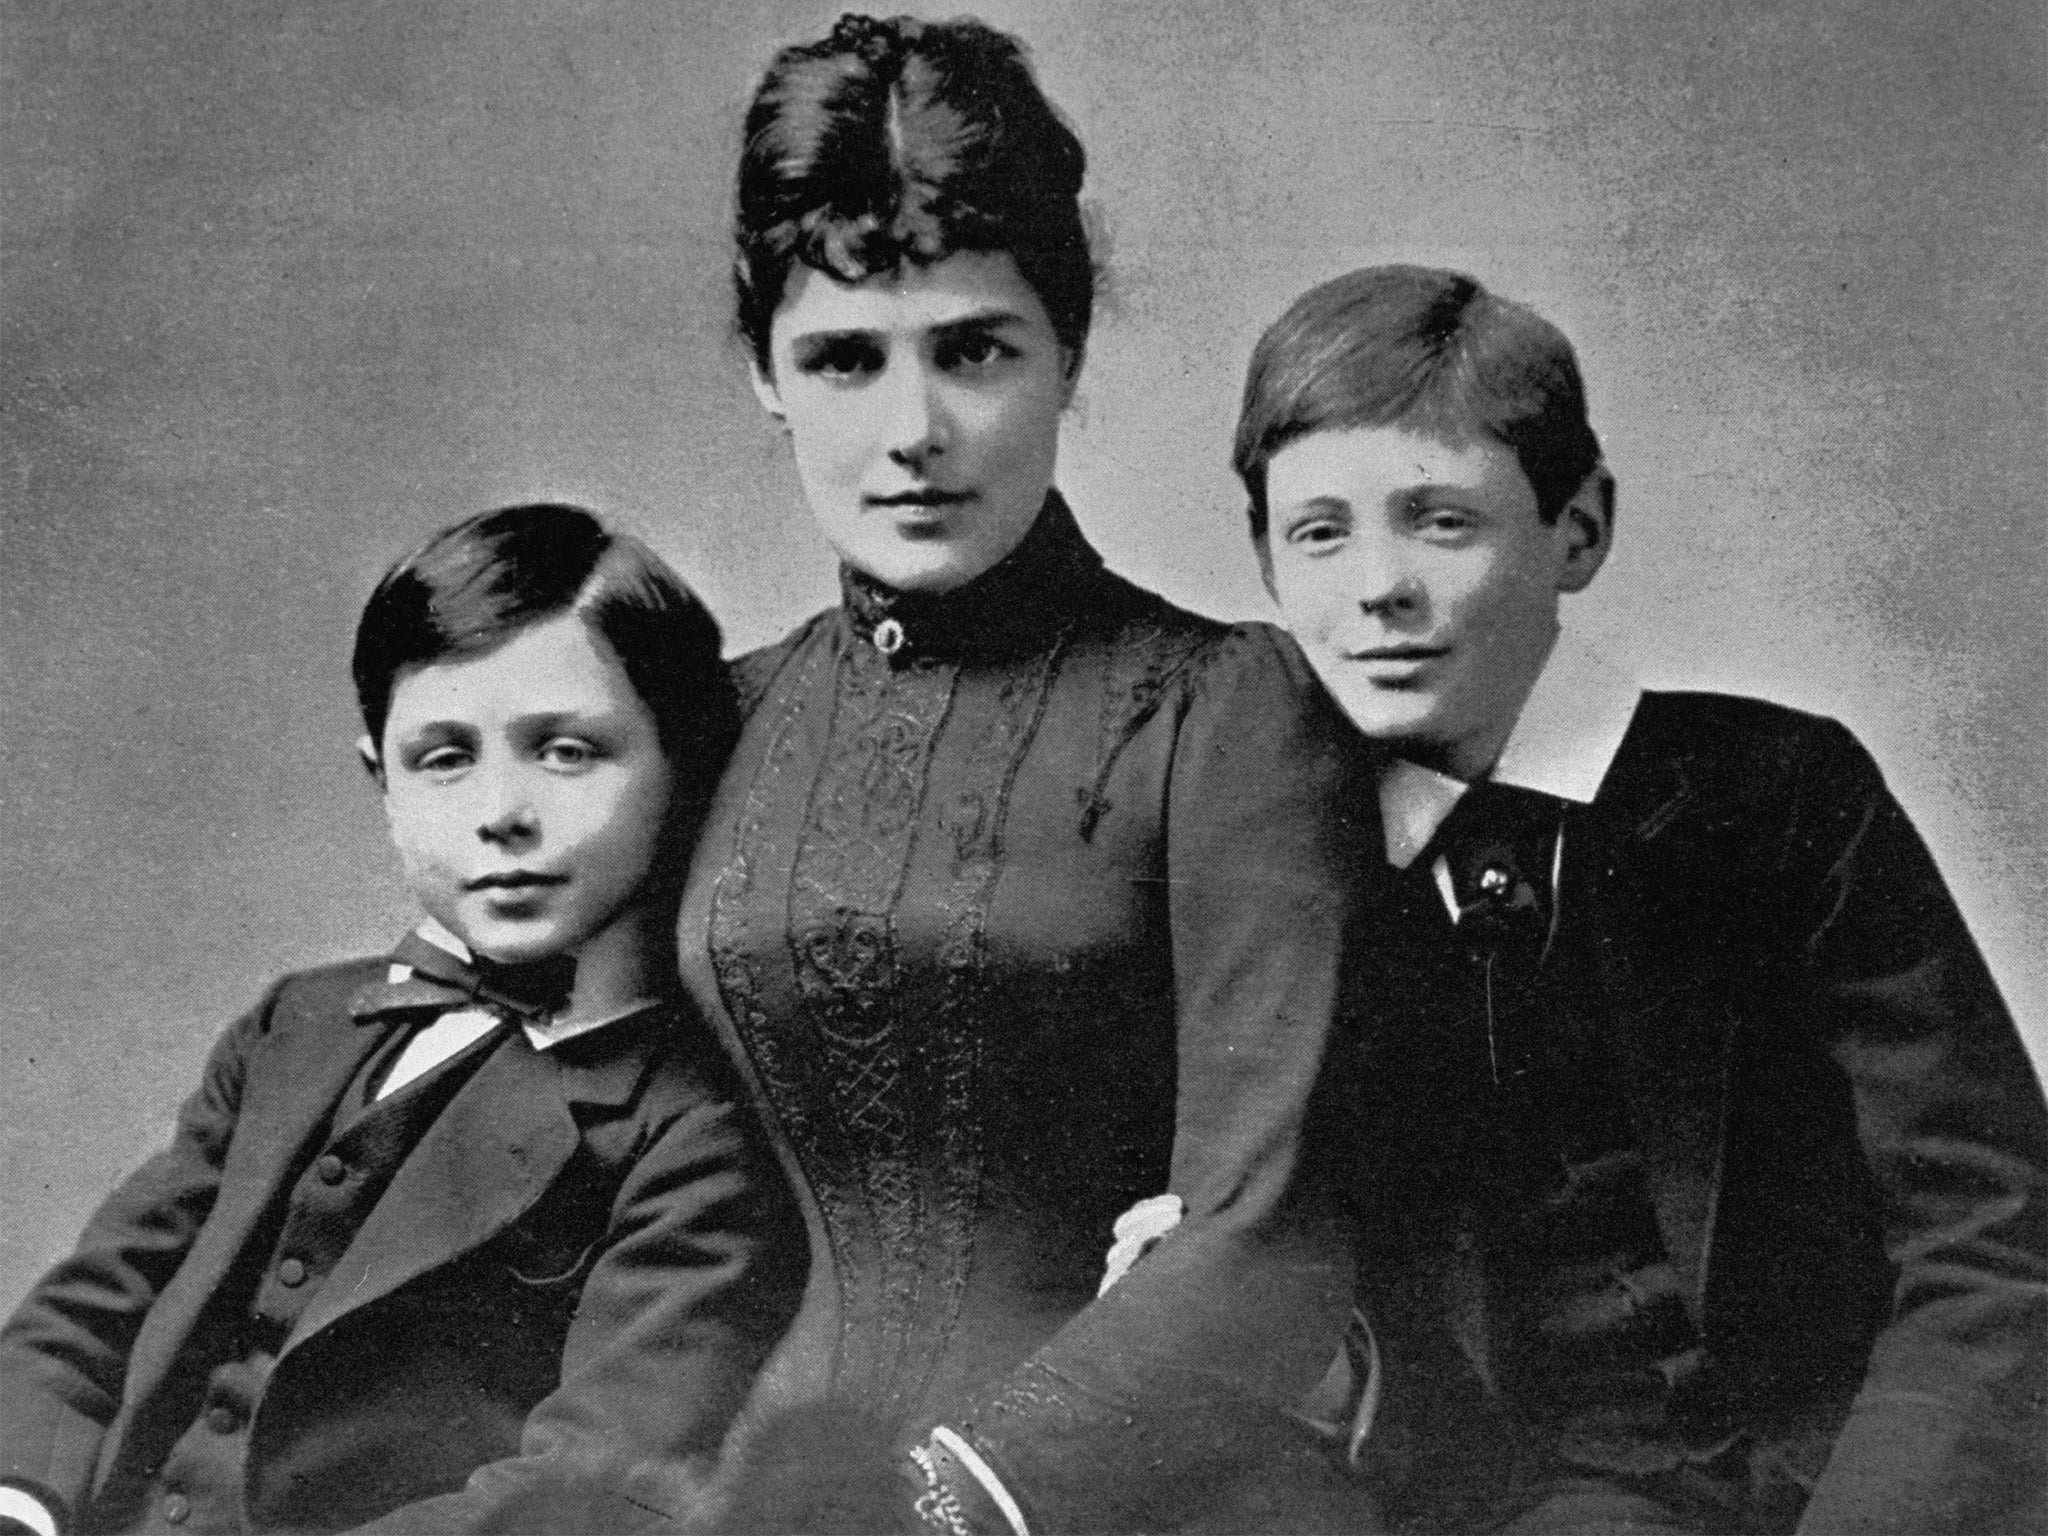 The former Jennie Jerome, Lady Randolph Churchill, born in New York, with her sons John (left) and Winston, in 1885